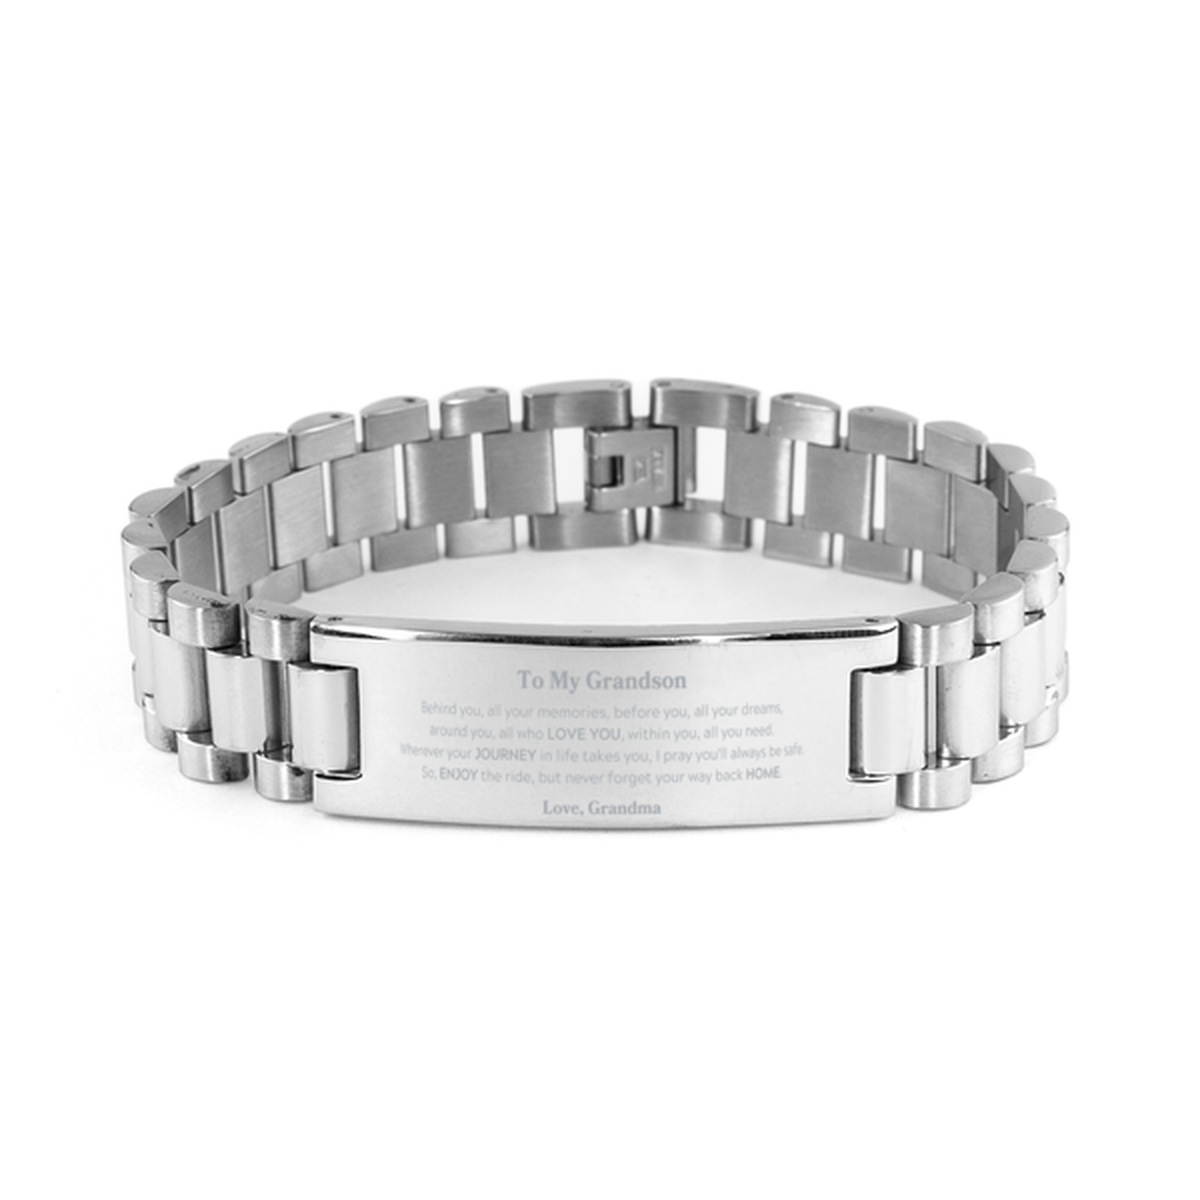 To My Grandson Graduation Gifts from Grandma, Grandson Ladder Stainless Steel Bracelet Christmas Birthday Gifts for Grandson Behind you, all your memories, before you, all your dreams. Love, Grandma